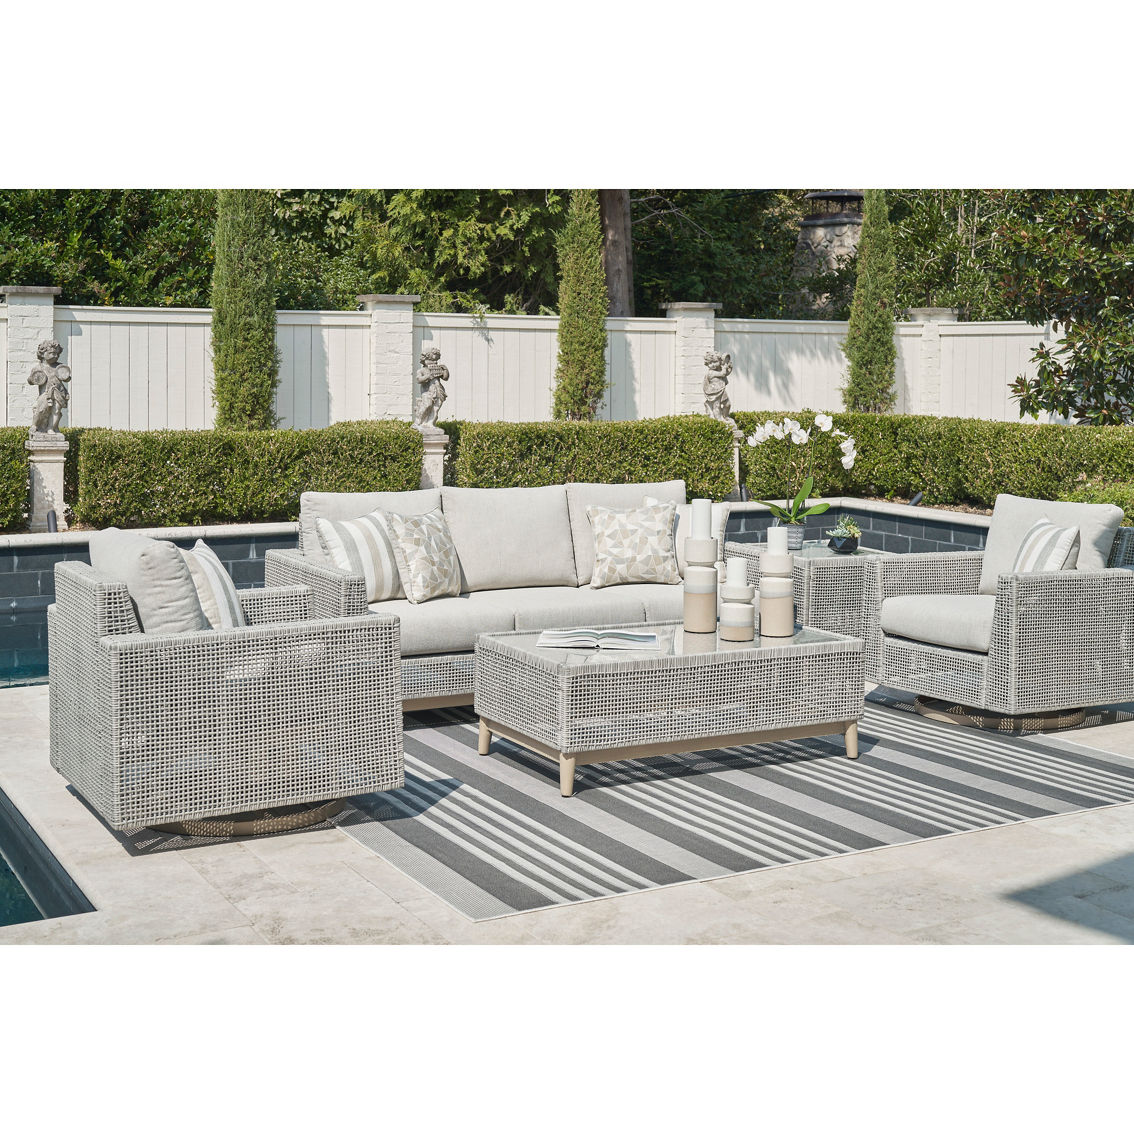 Signature Design by Ashley Seton Creek Outdoor Coffee Table - Image 5 of 6